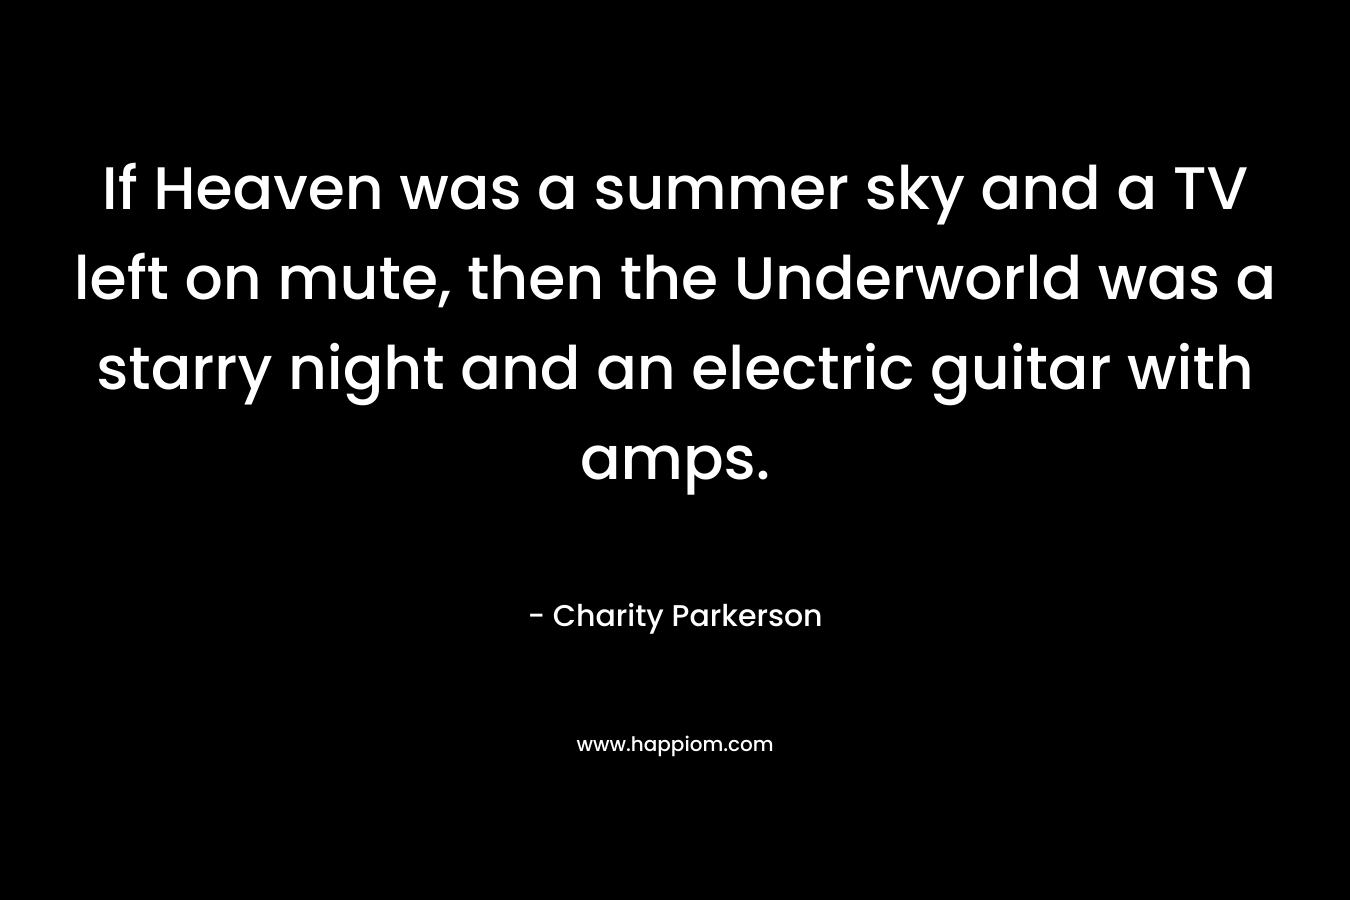 If Heaven was a summer sky and a TV left on mute, then the Underworld was a starry night and an electric guitar with amps. – Charity Parkerson